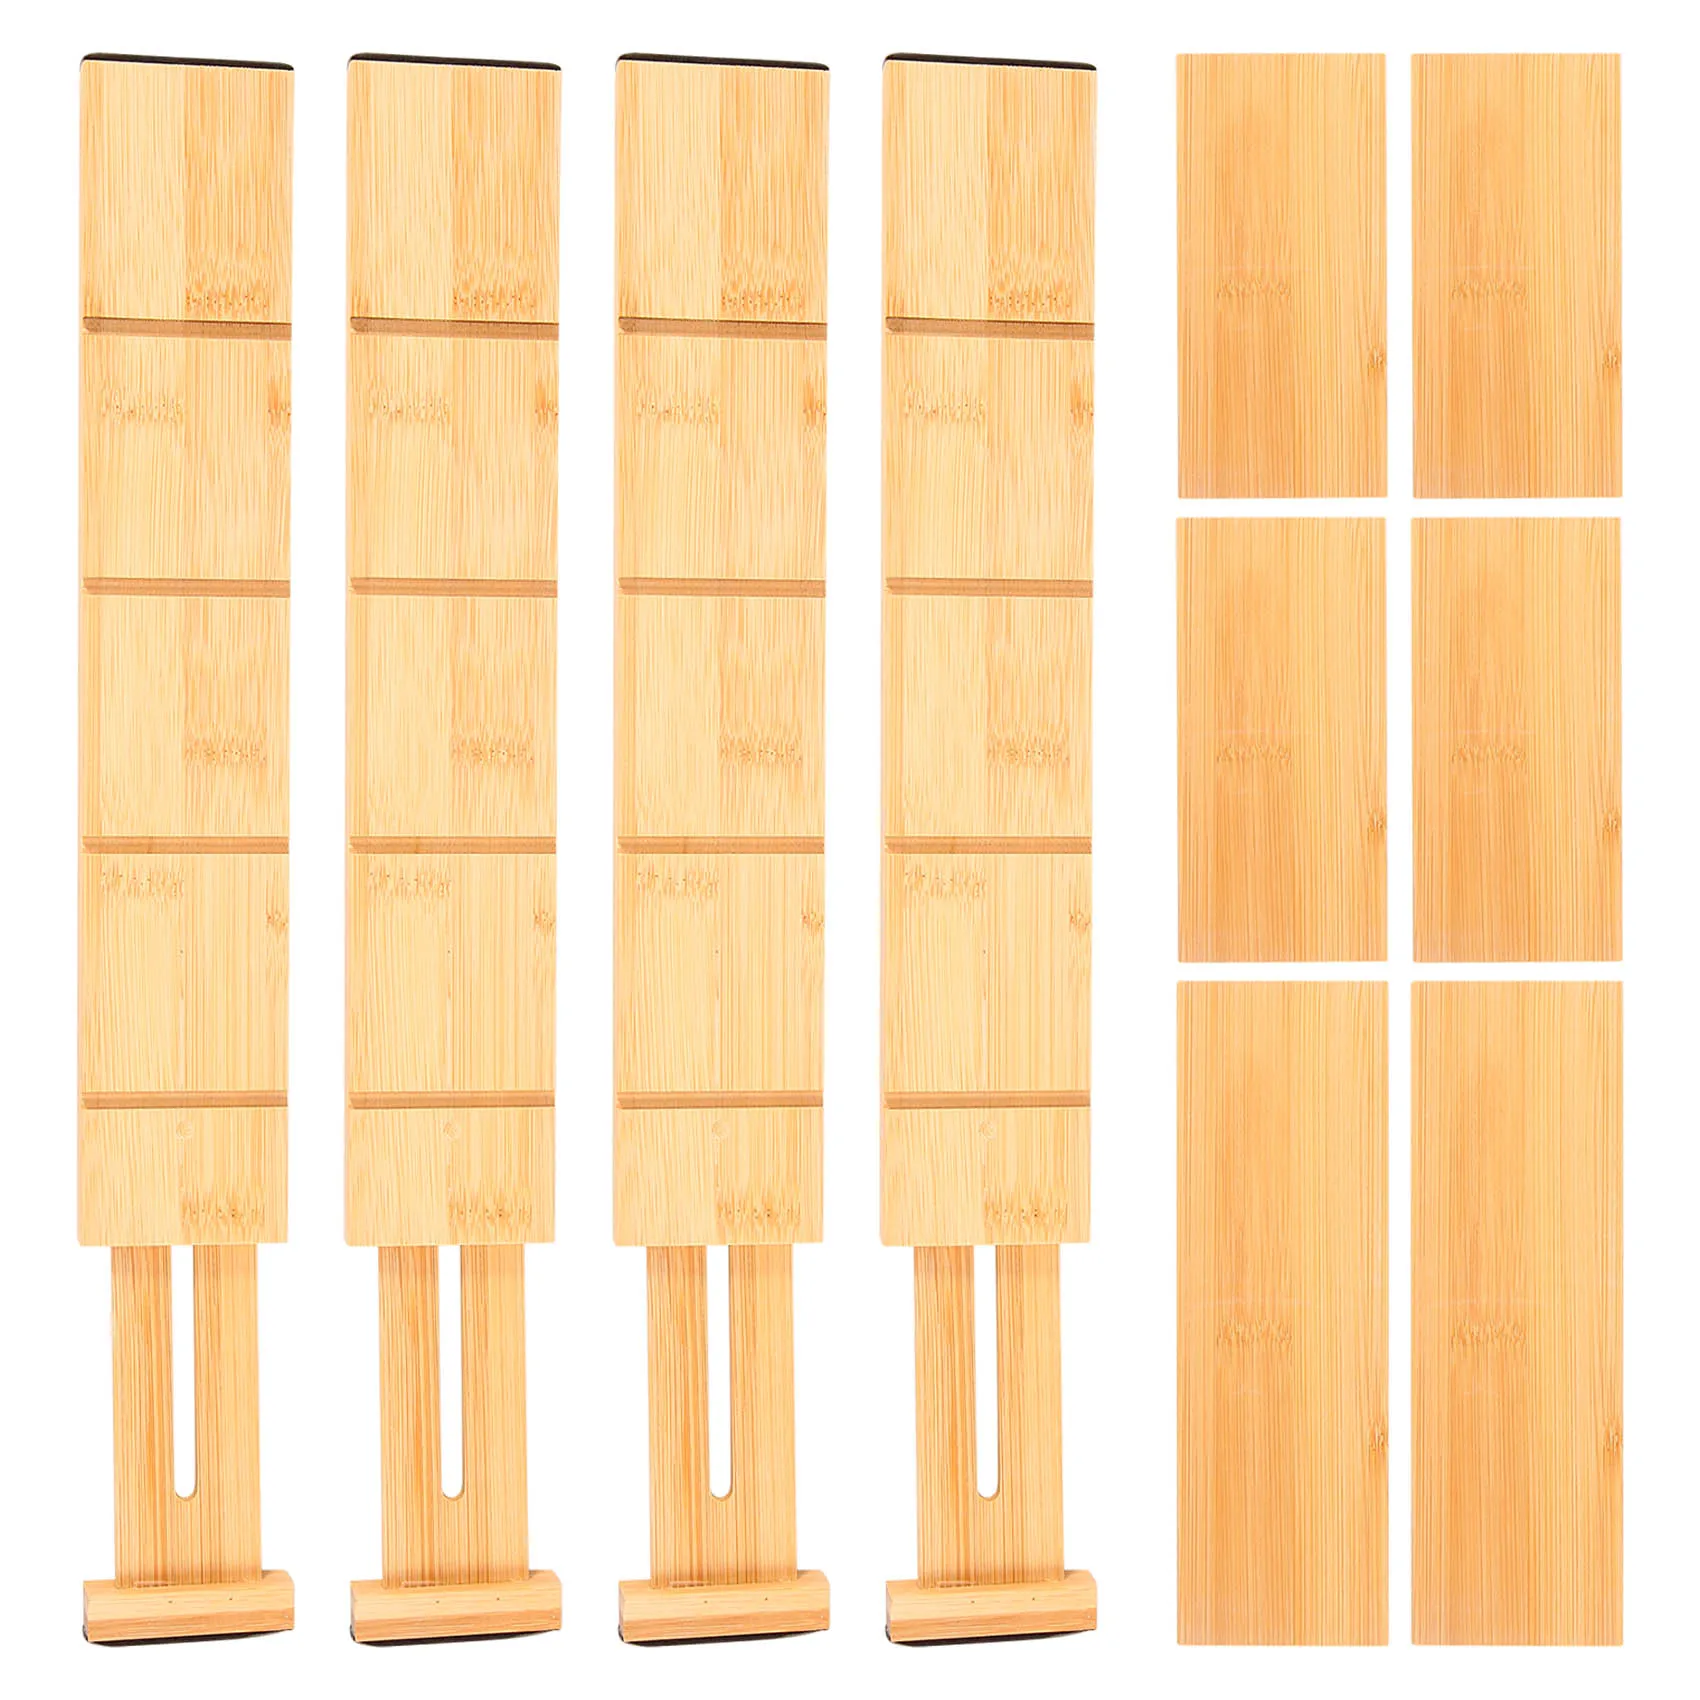 

4Pcs Bamboo Drawer Dividers Organizer with 6 Extra Mini Dividers Spring Loaded for Kitchen, Bedroom, Bathroom and Office